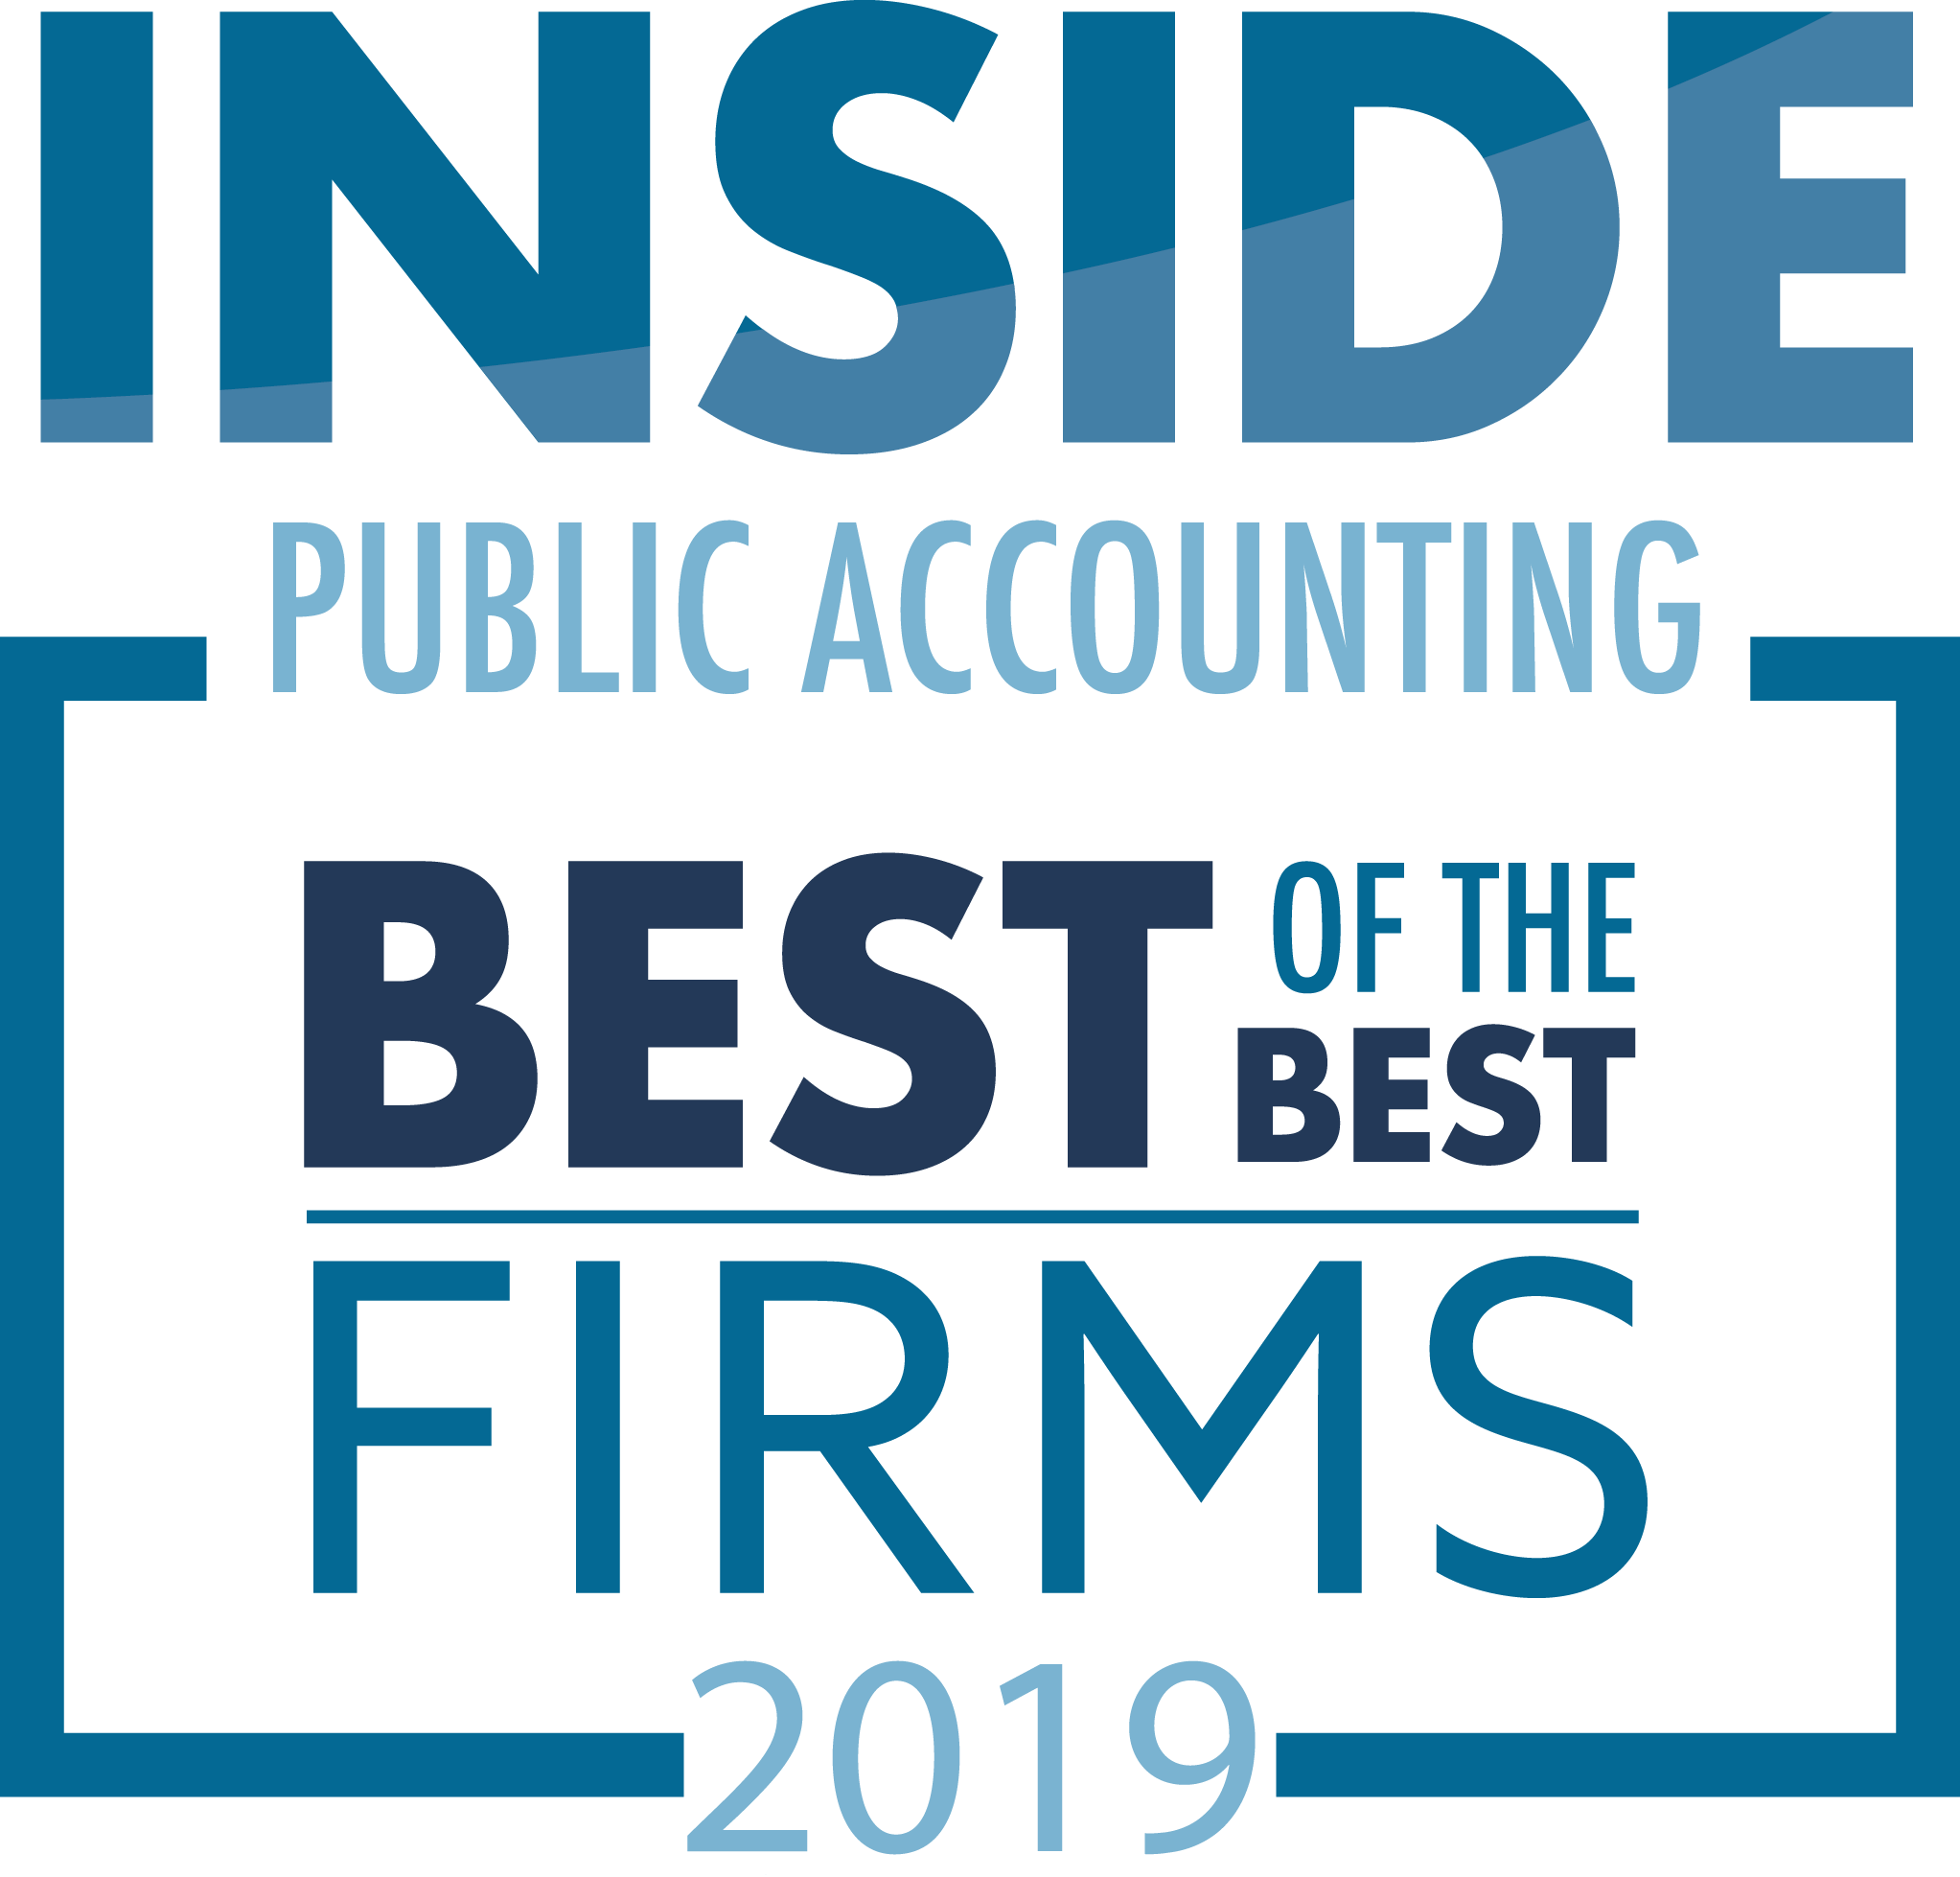 RRBB Accountants & Advisors Wins IPA’s 2019 ‘Best of the Best’ and ‘Top 300 Firms’ Awards Image